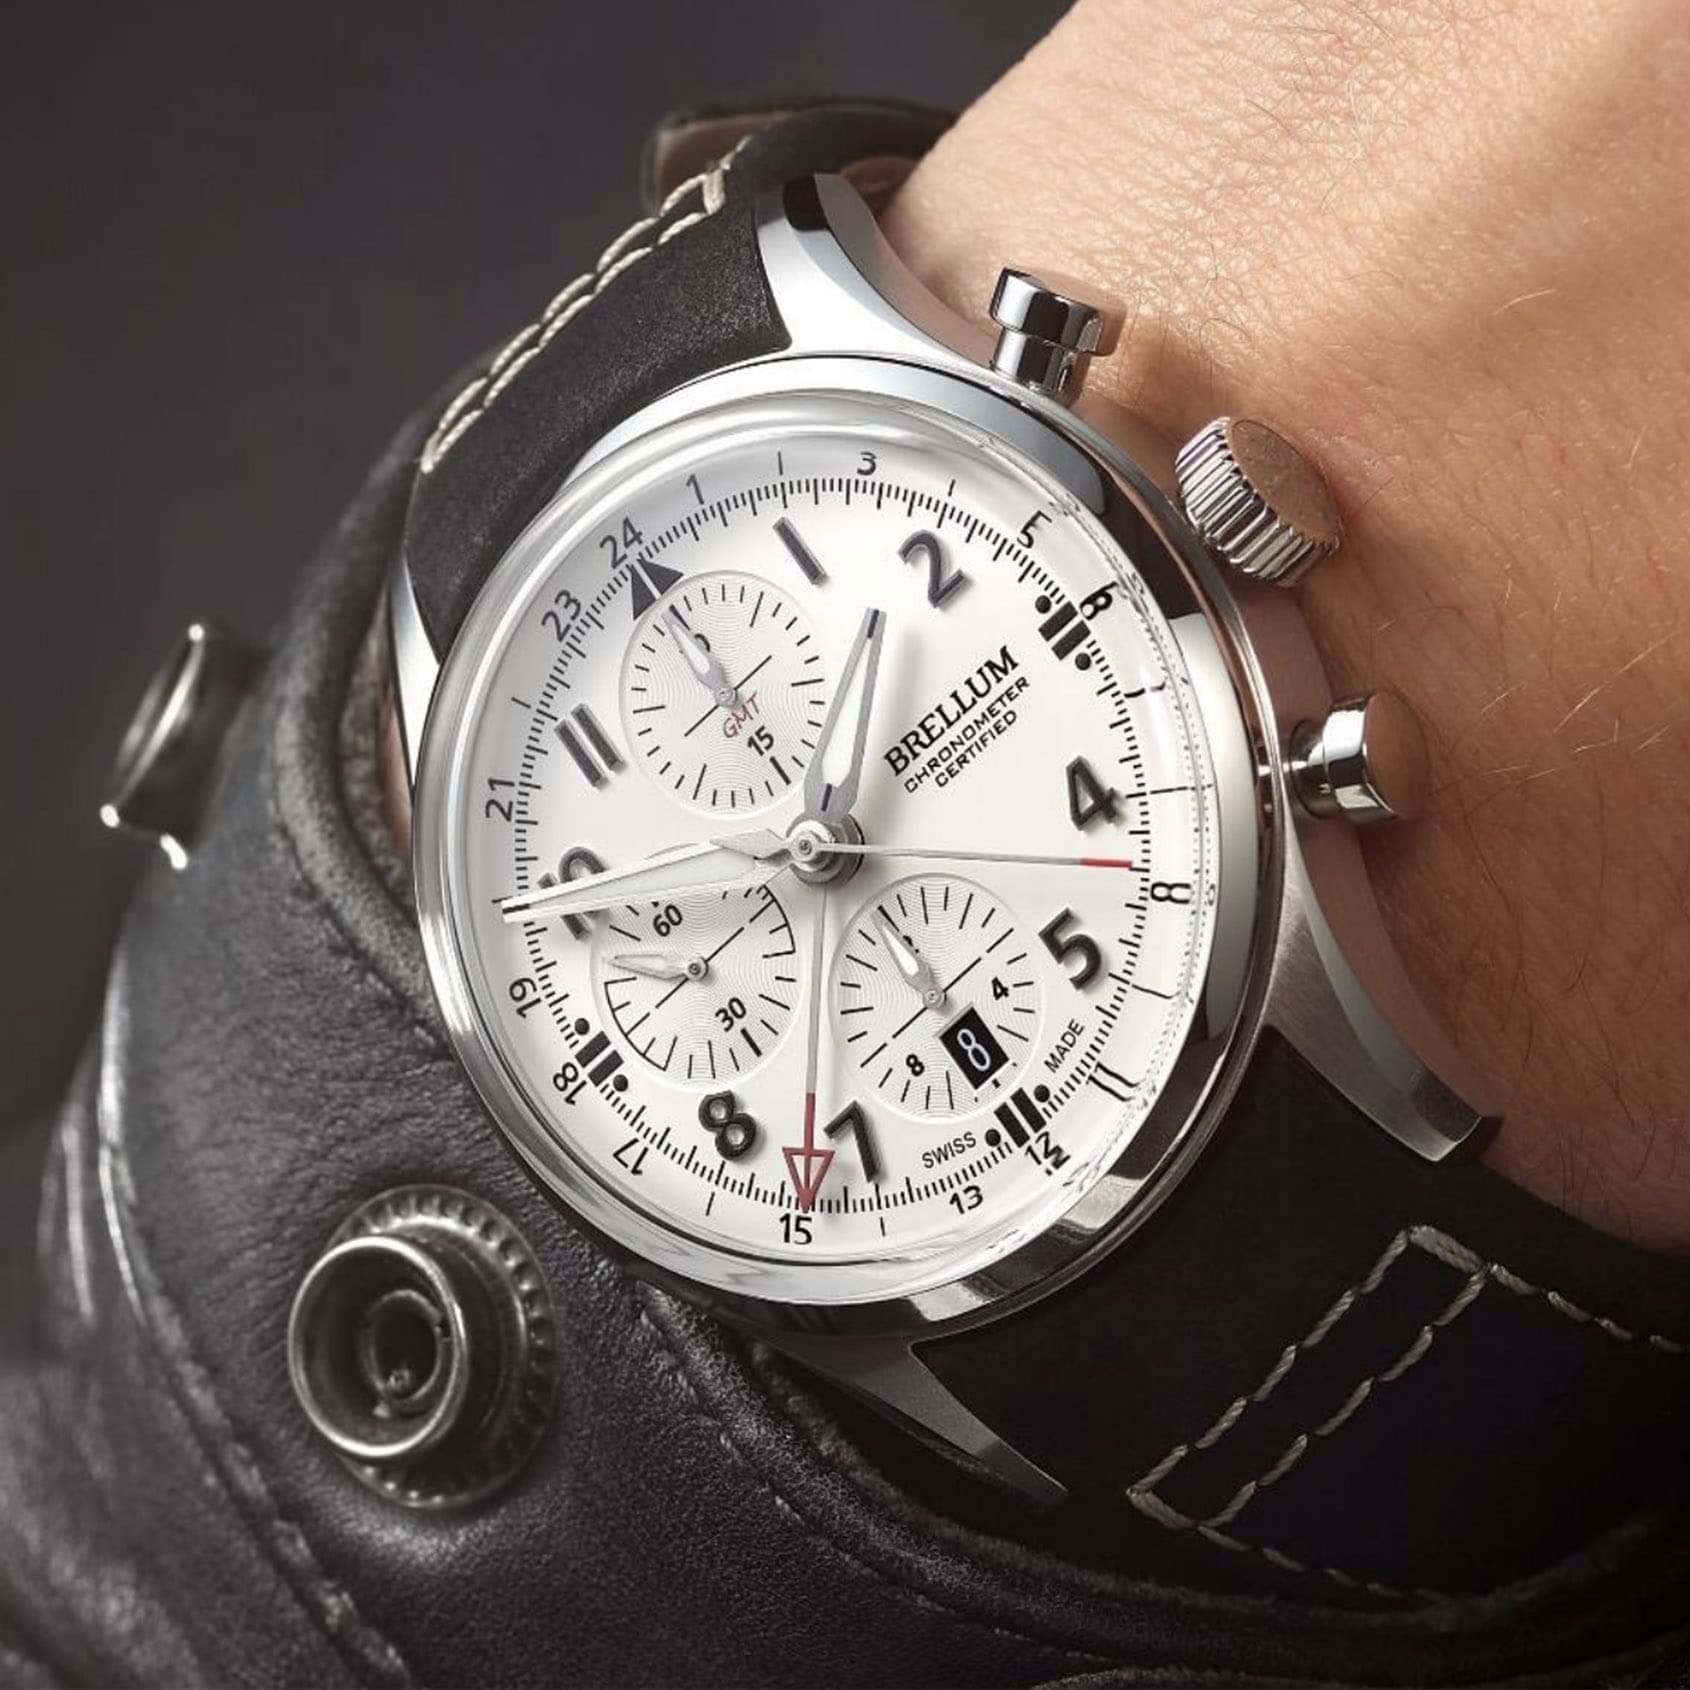 INTRODUCING: The Brellum Pilot LE.1 GMT Chronometer wants to become your frequent flyer